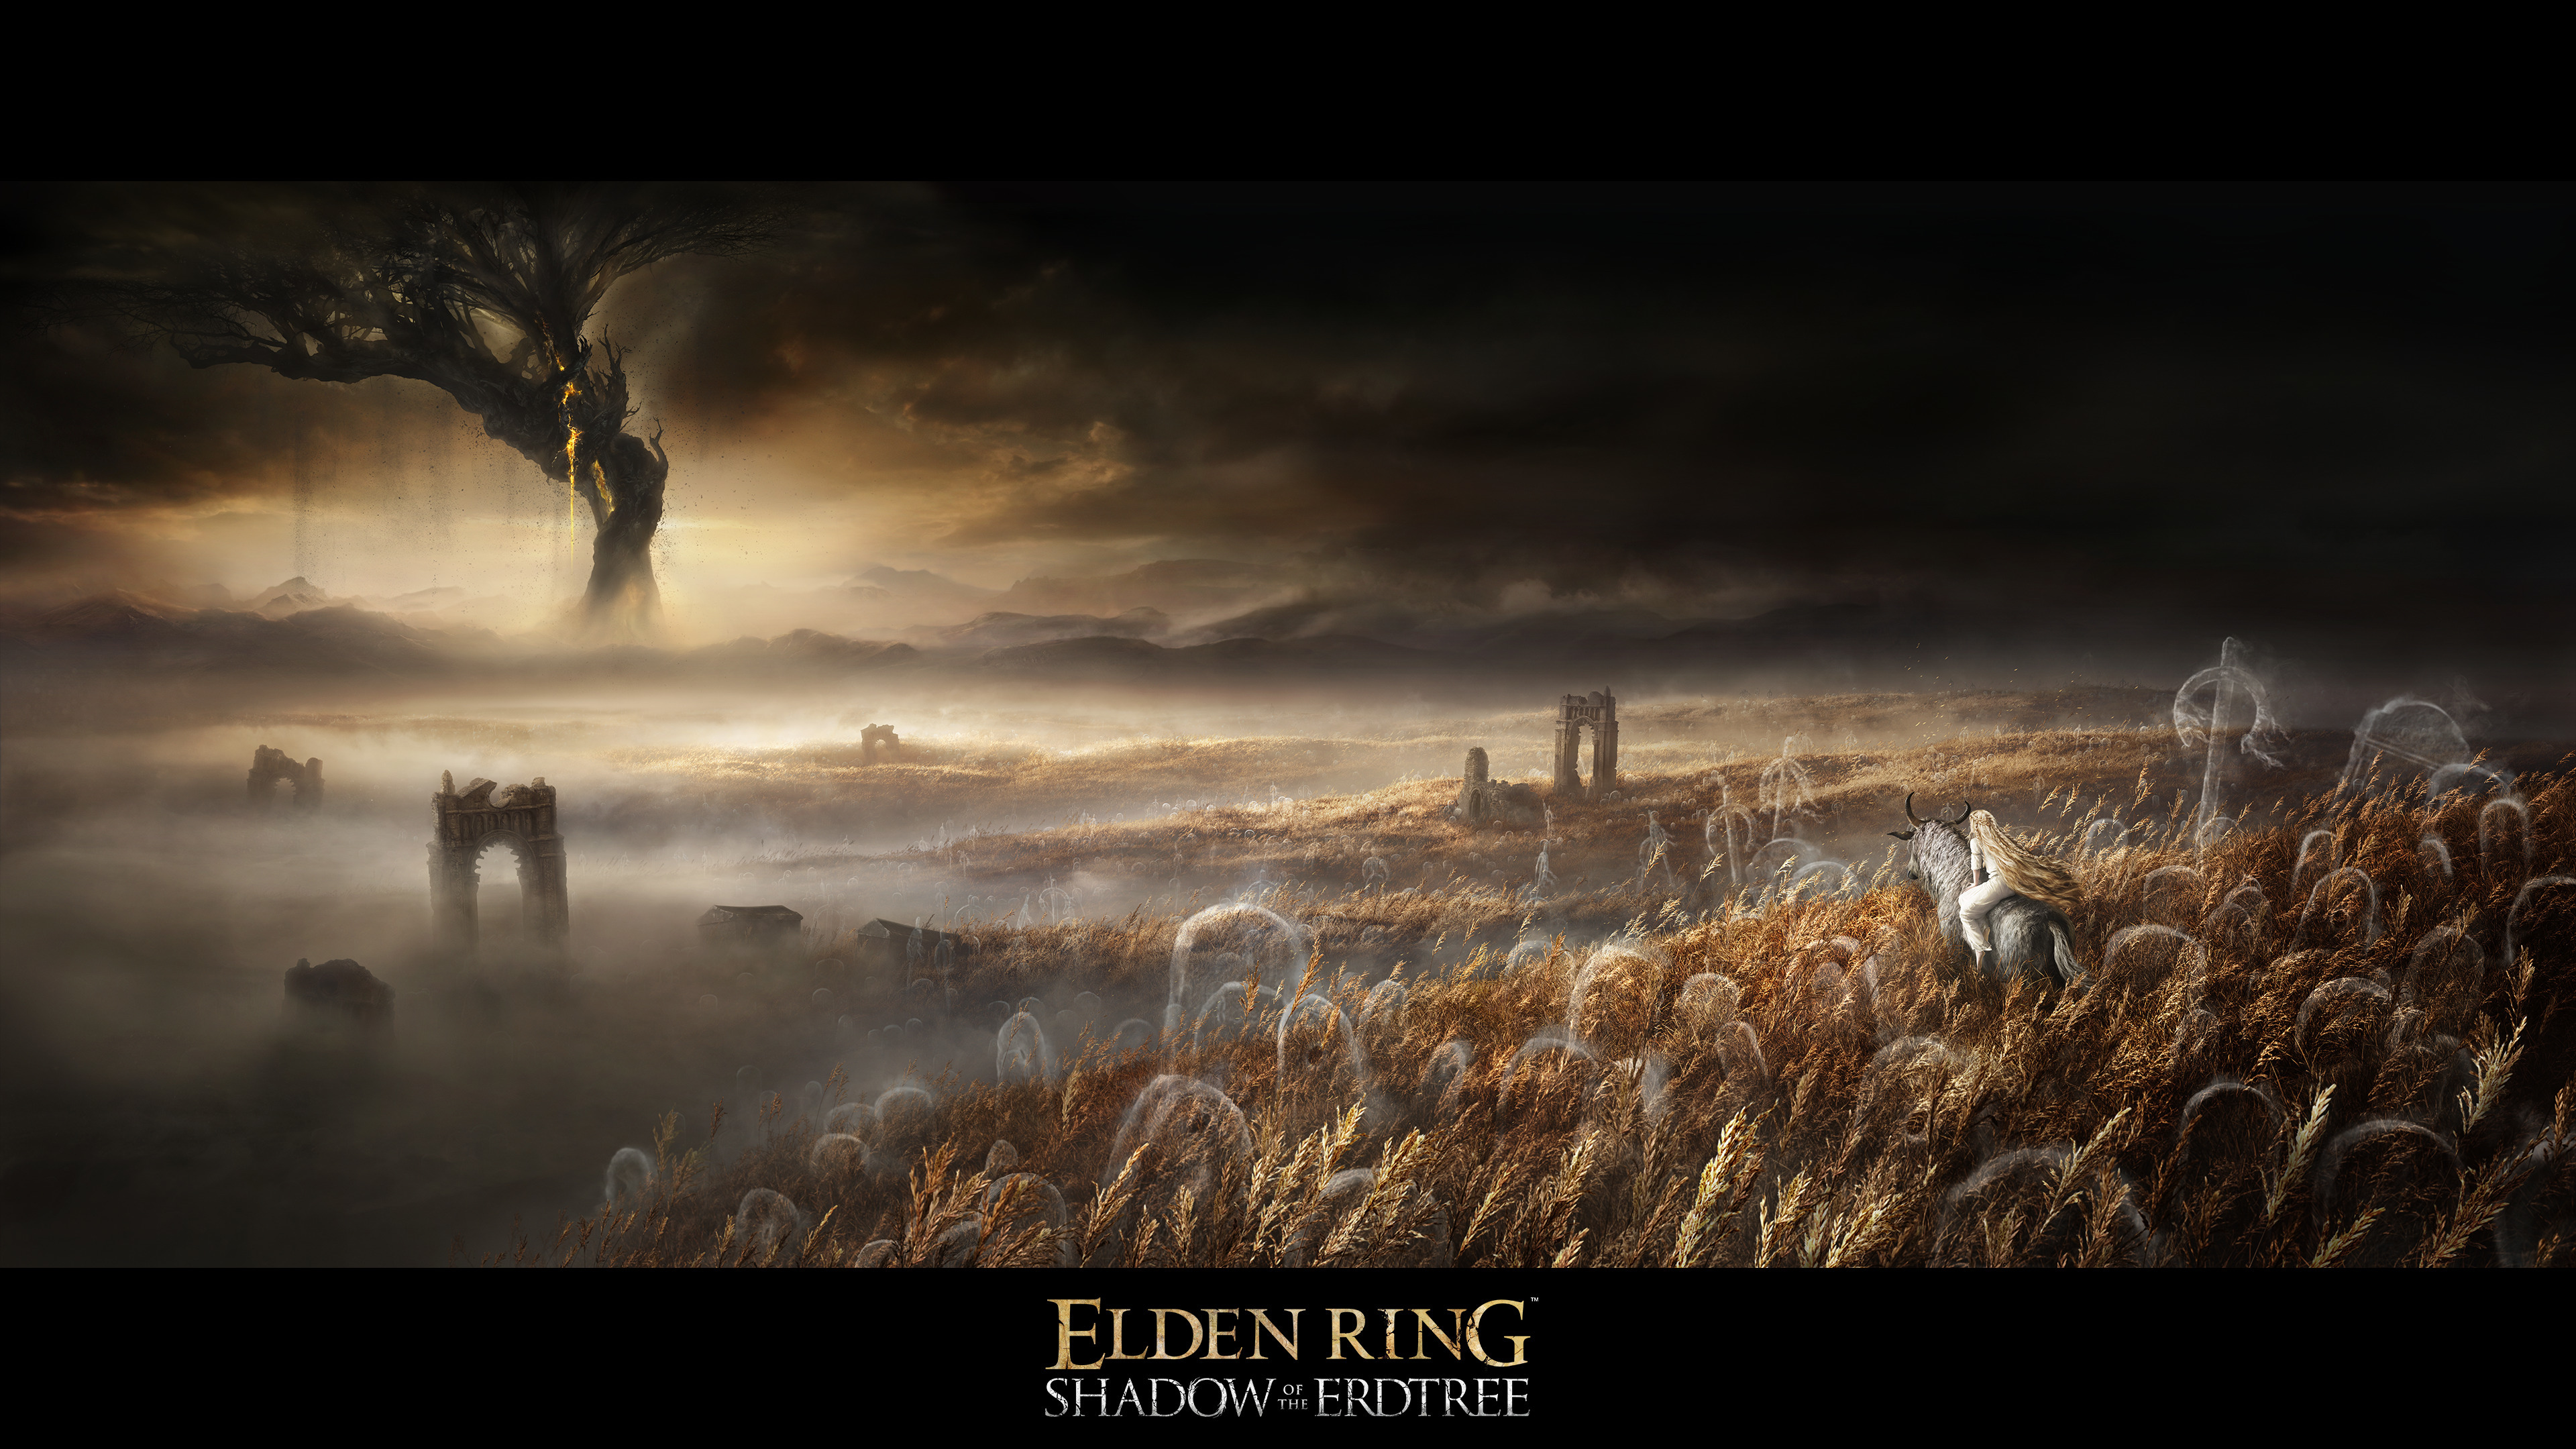 Elden Ring: Shadow of the Erdtree DLC has been in development for over a year